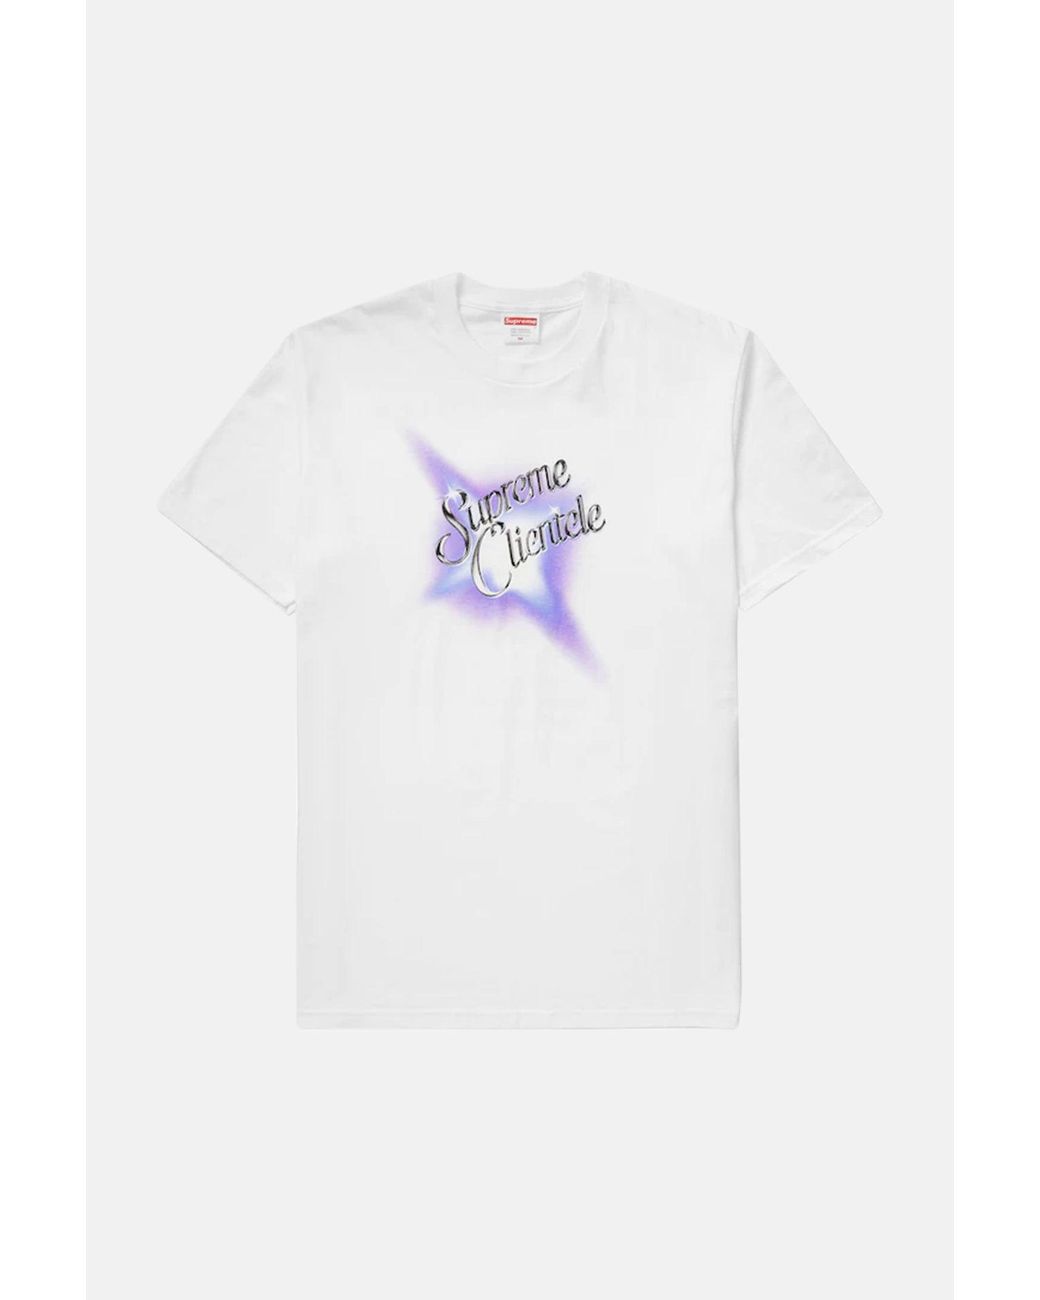 Supreme Clientele T-shirt White in Blue | Lyst